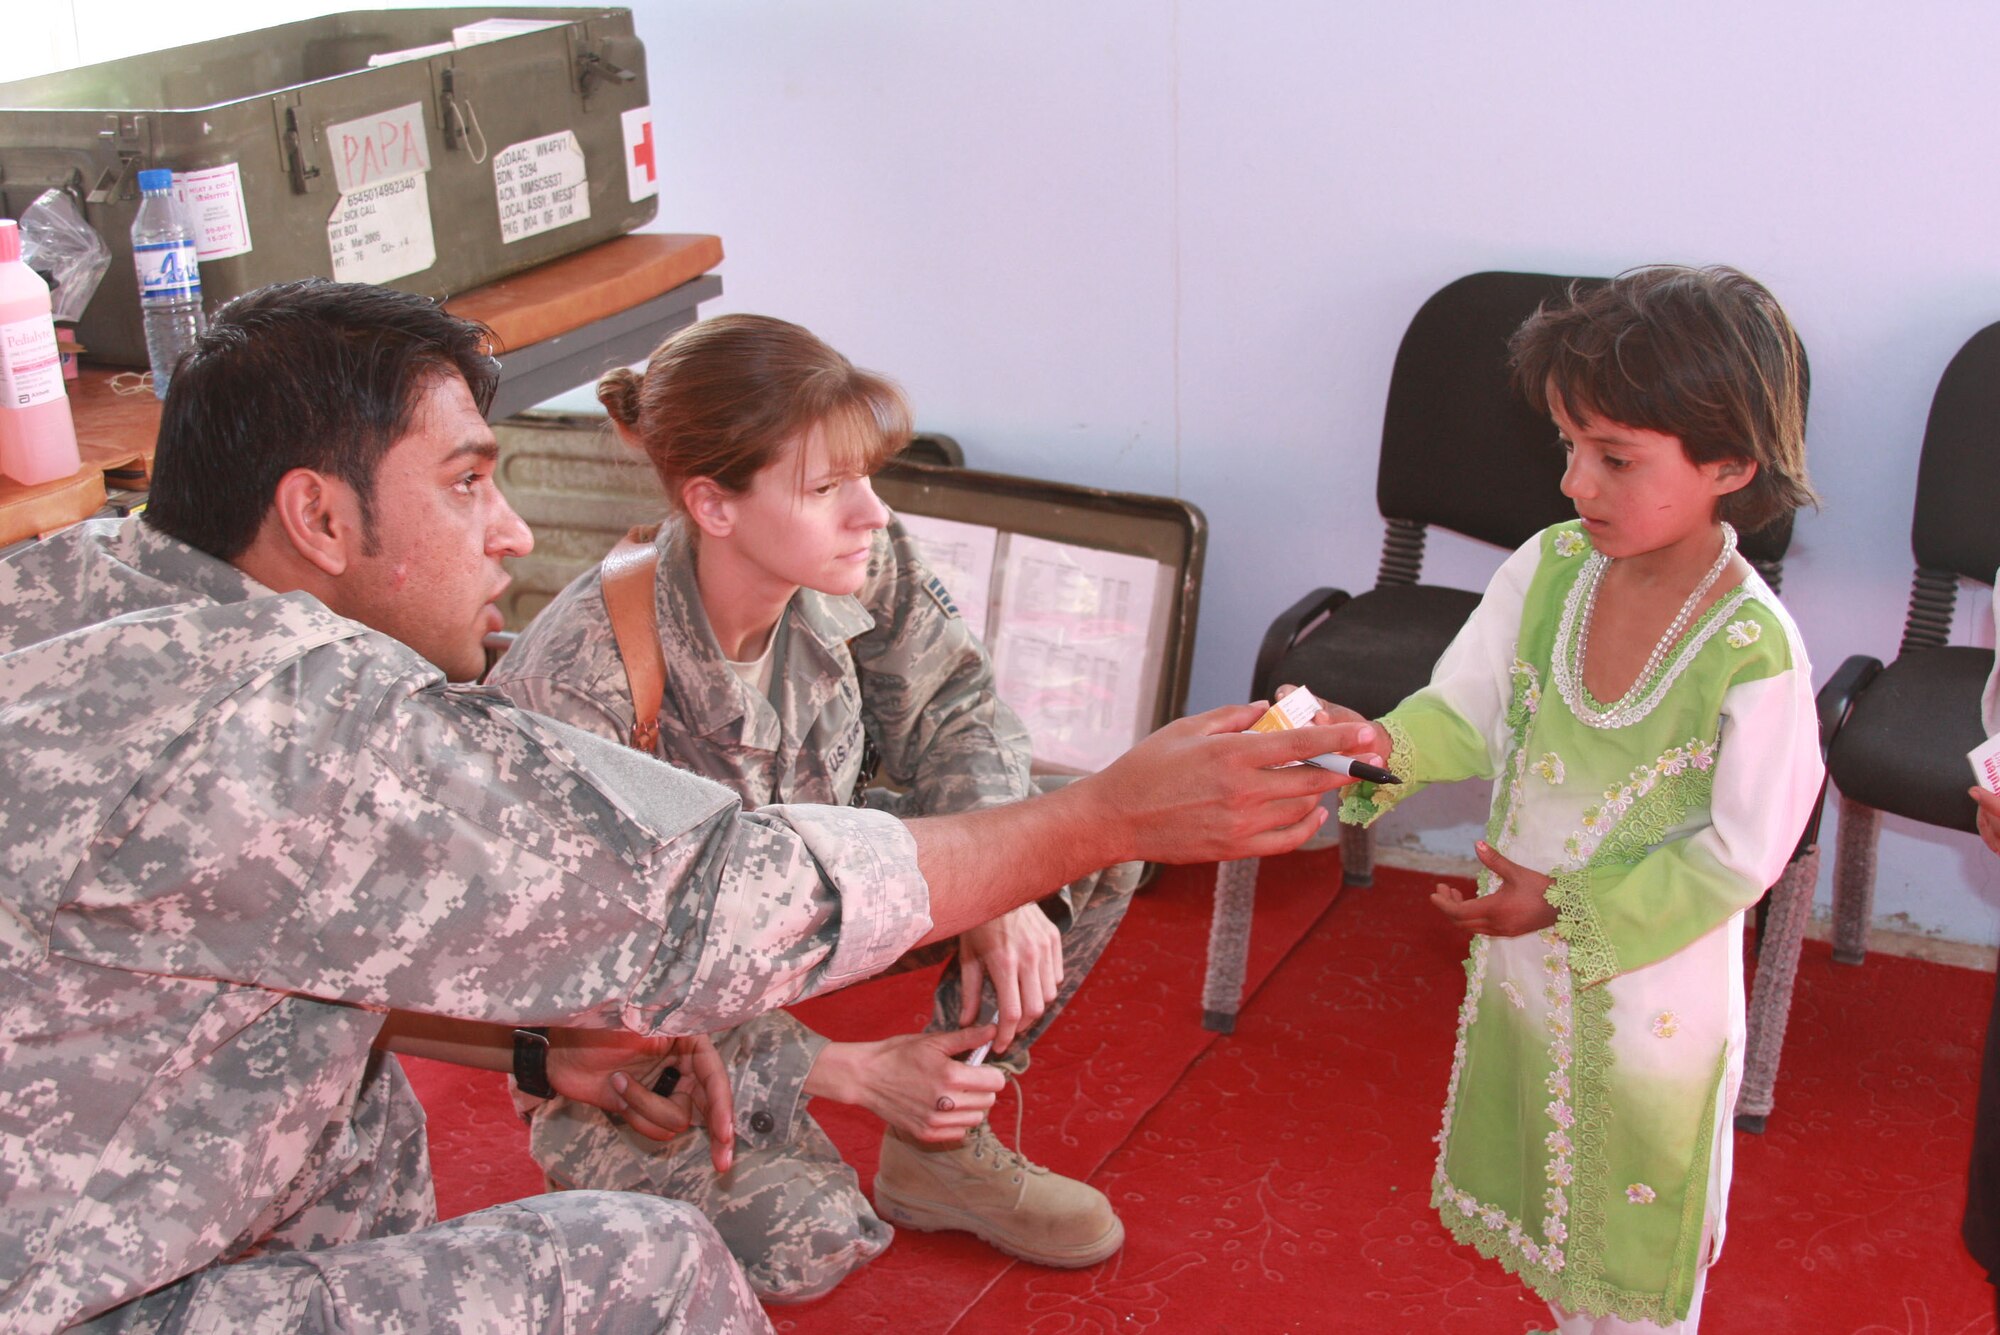 BAGRAM AIR FIELD, Afghanistan – Staff Sgt. Janine Duschka, a medic for PRT Panjshir, looks on while an interpreter explains medication dosages to a young girl during the medical engagement on Oct. 16 at Obdara clinic in Anaba District. 